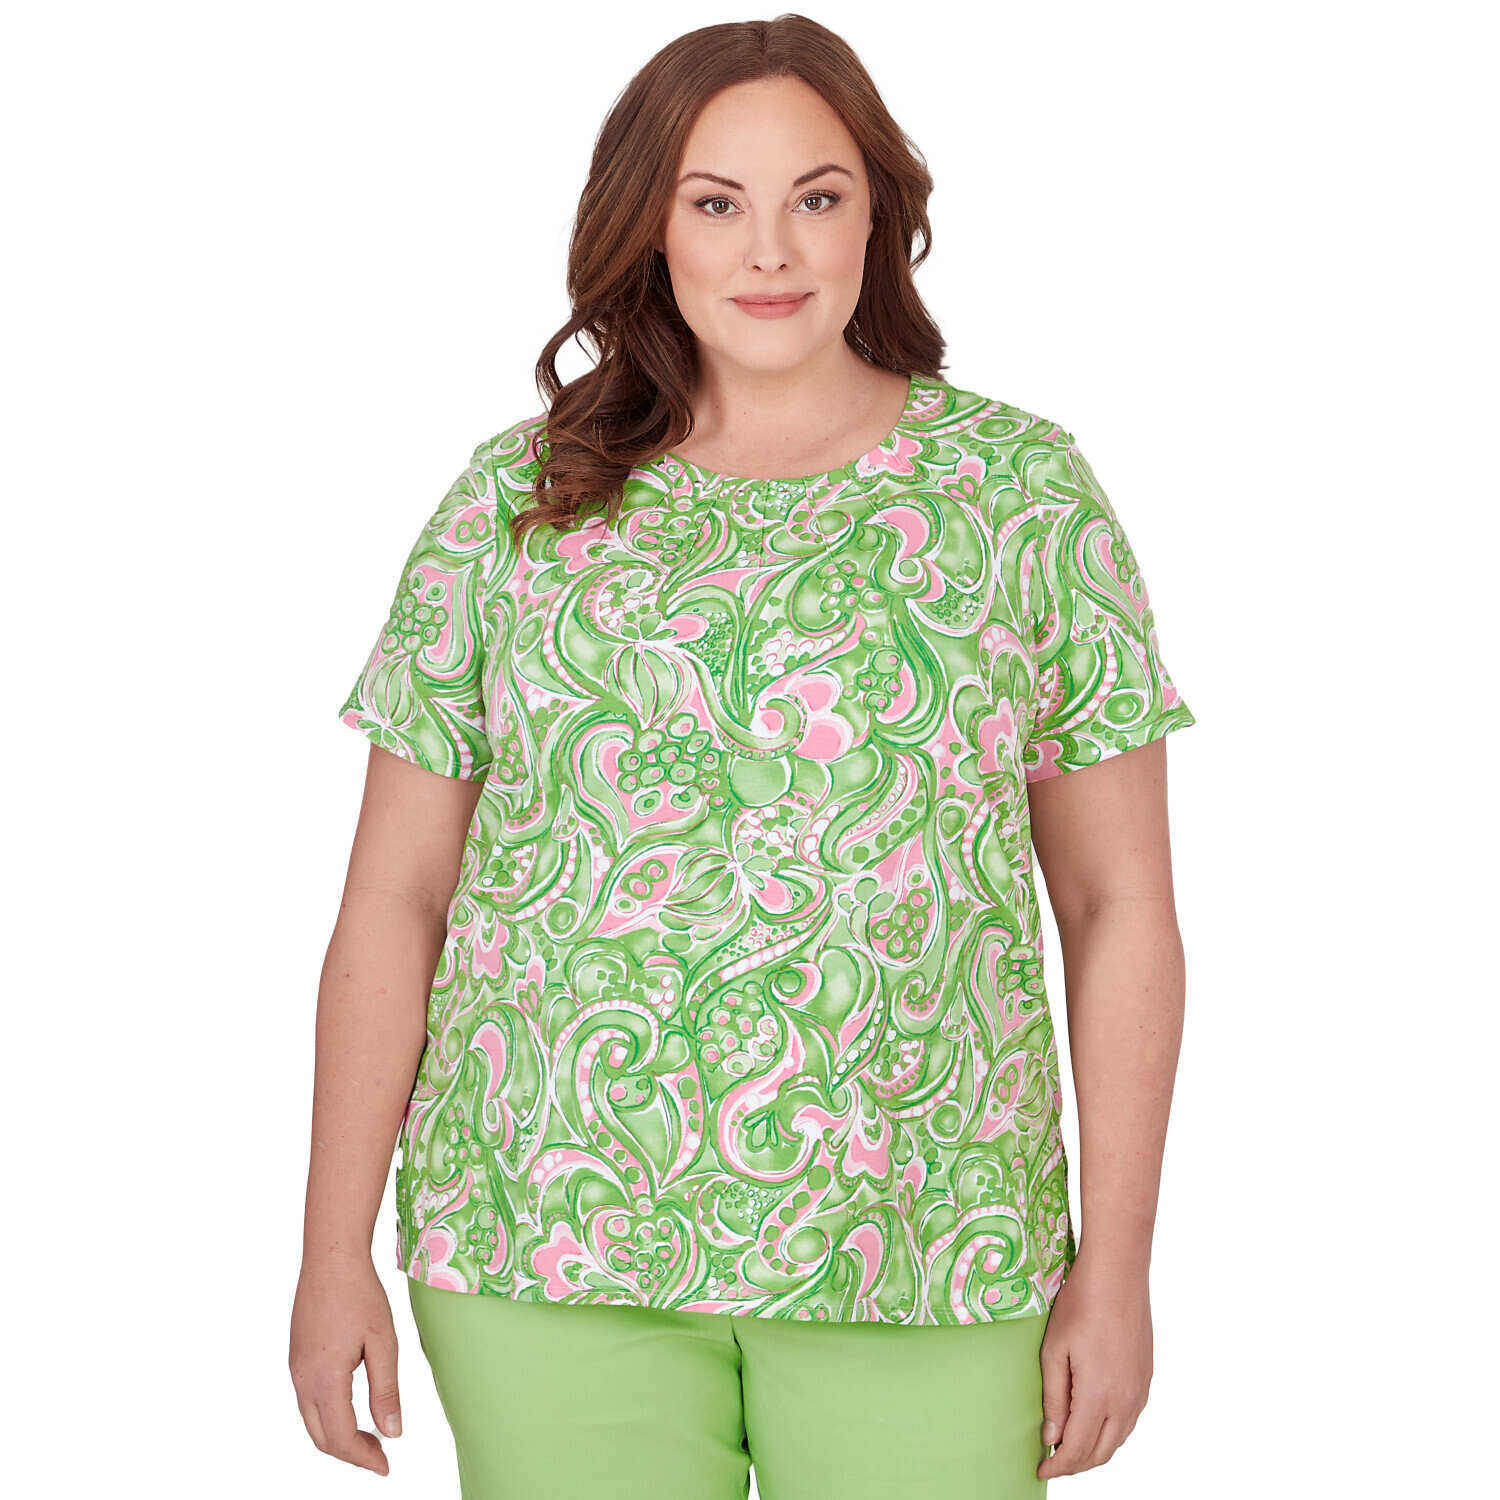 Alfred Dunner Womens Womens Plus-Size Give Thanks Top